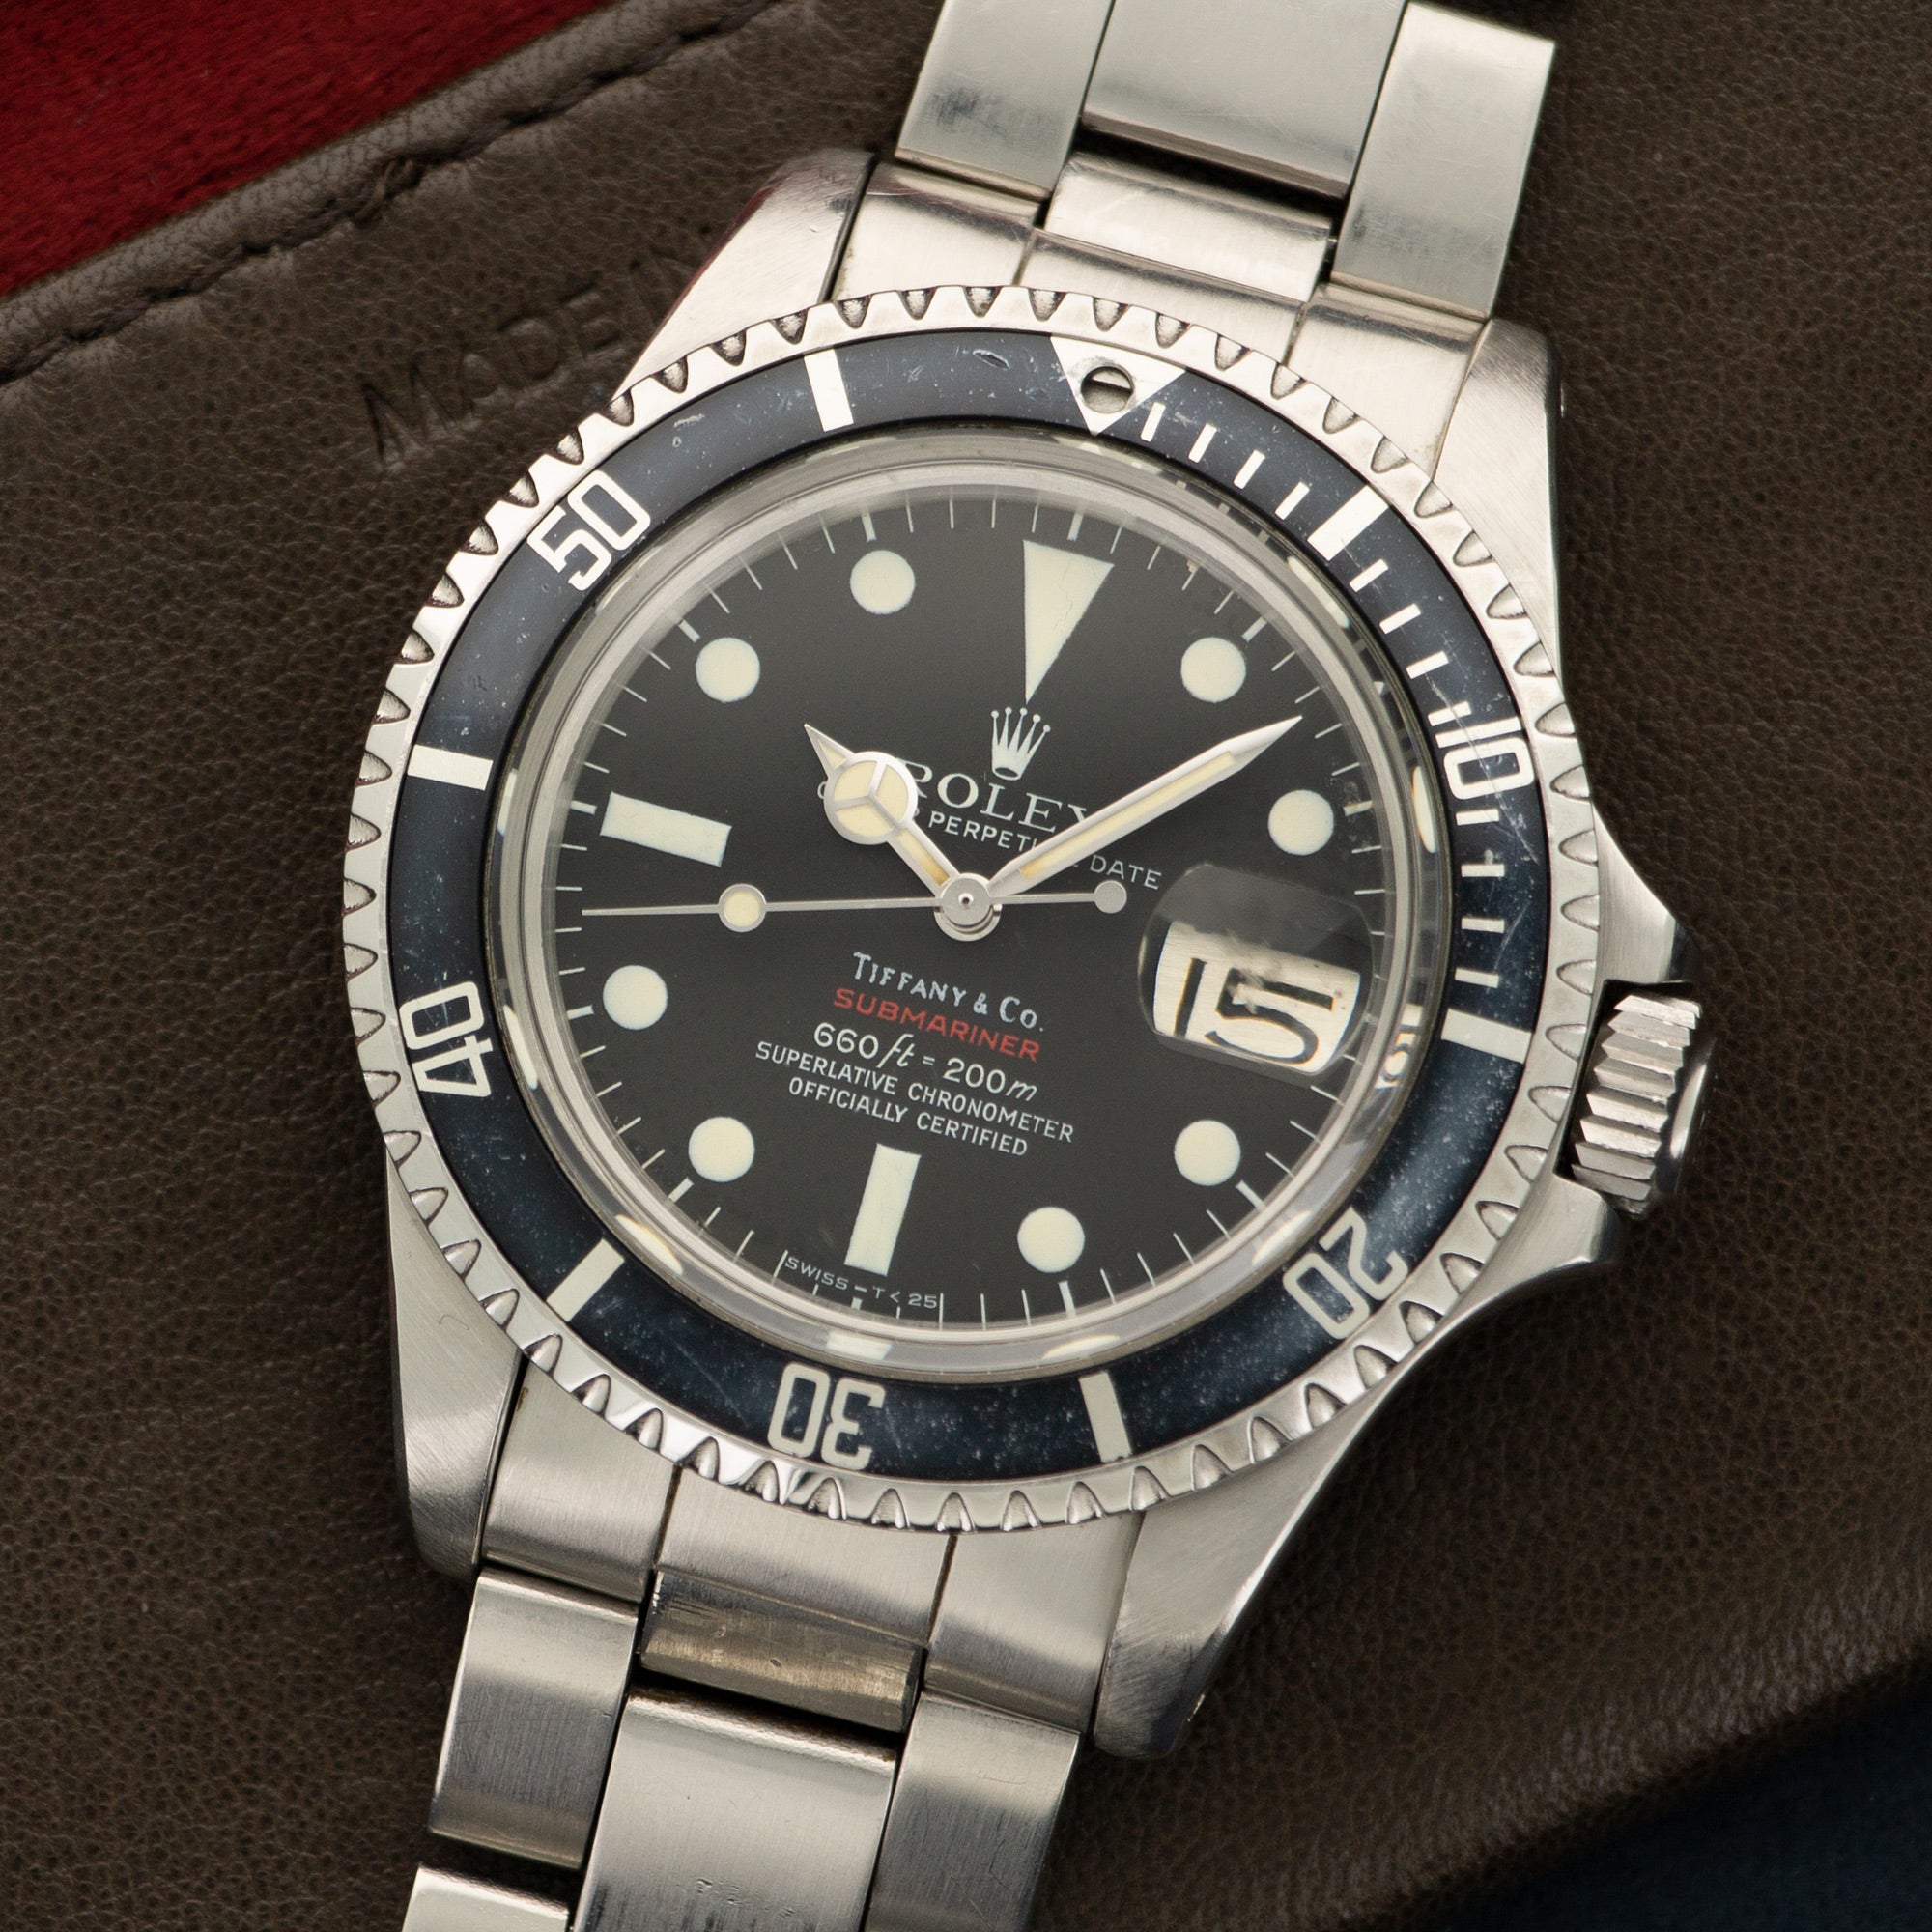 Rolex - Rolex Red Submariner Watch Ref. 1680 Retailed by Tiffany & Co. - The Keystone Watches